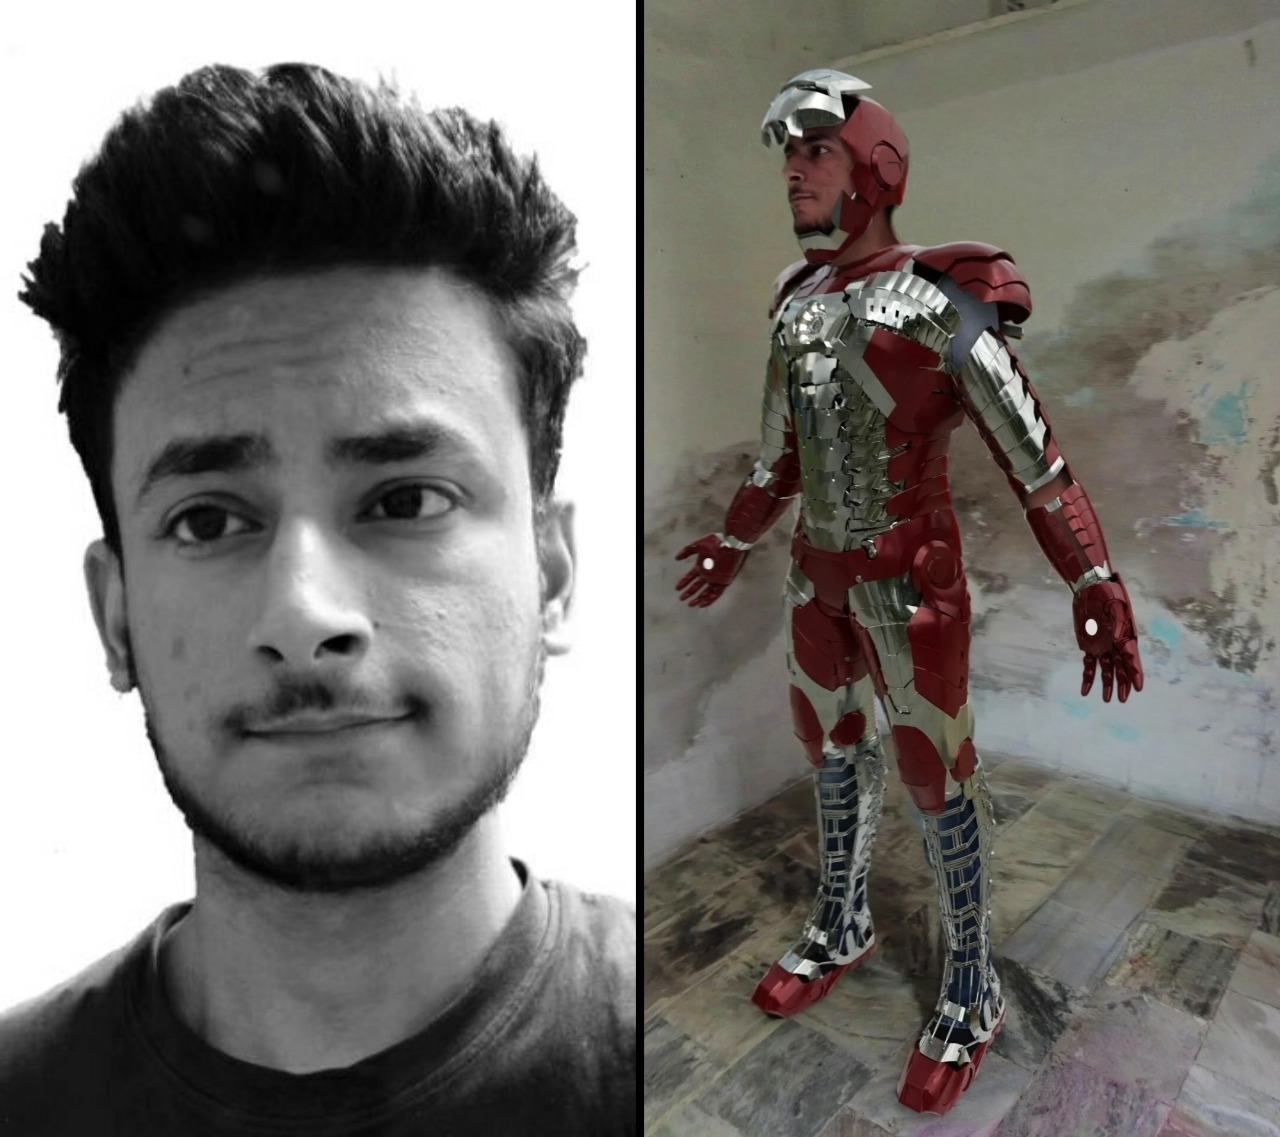 19 Year Old Lokesh Khatri made one of the best Quality Iron Man Mark 5 Suit which makes him. Famous around the YouTube.